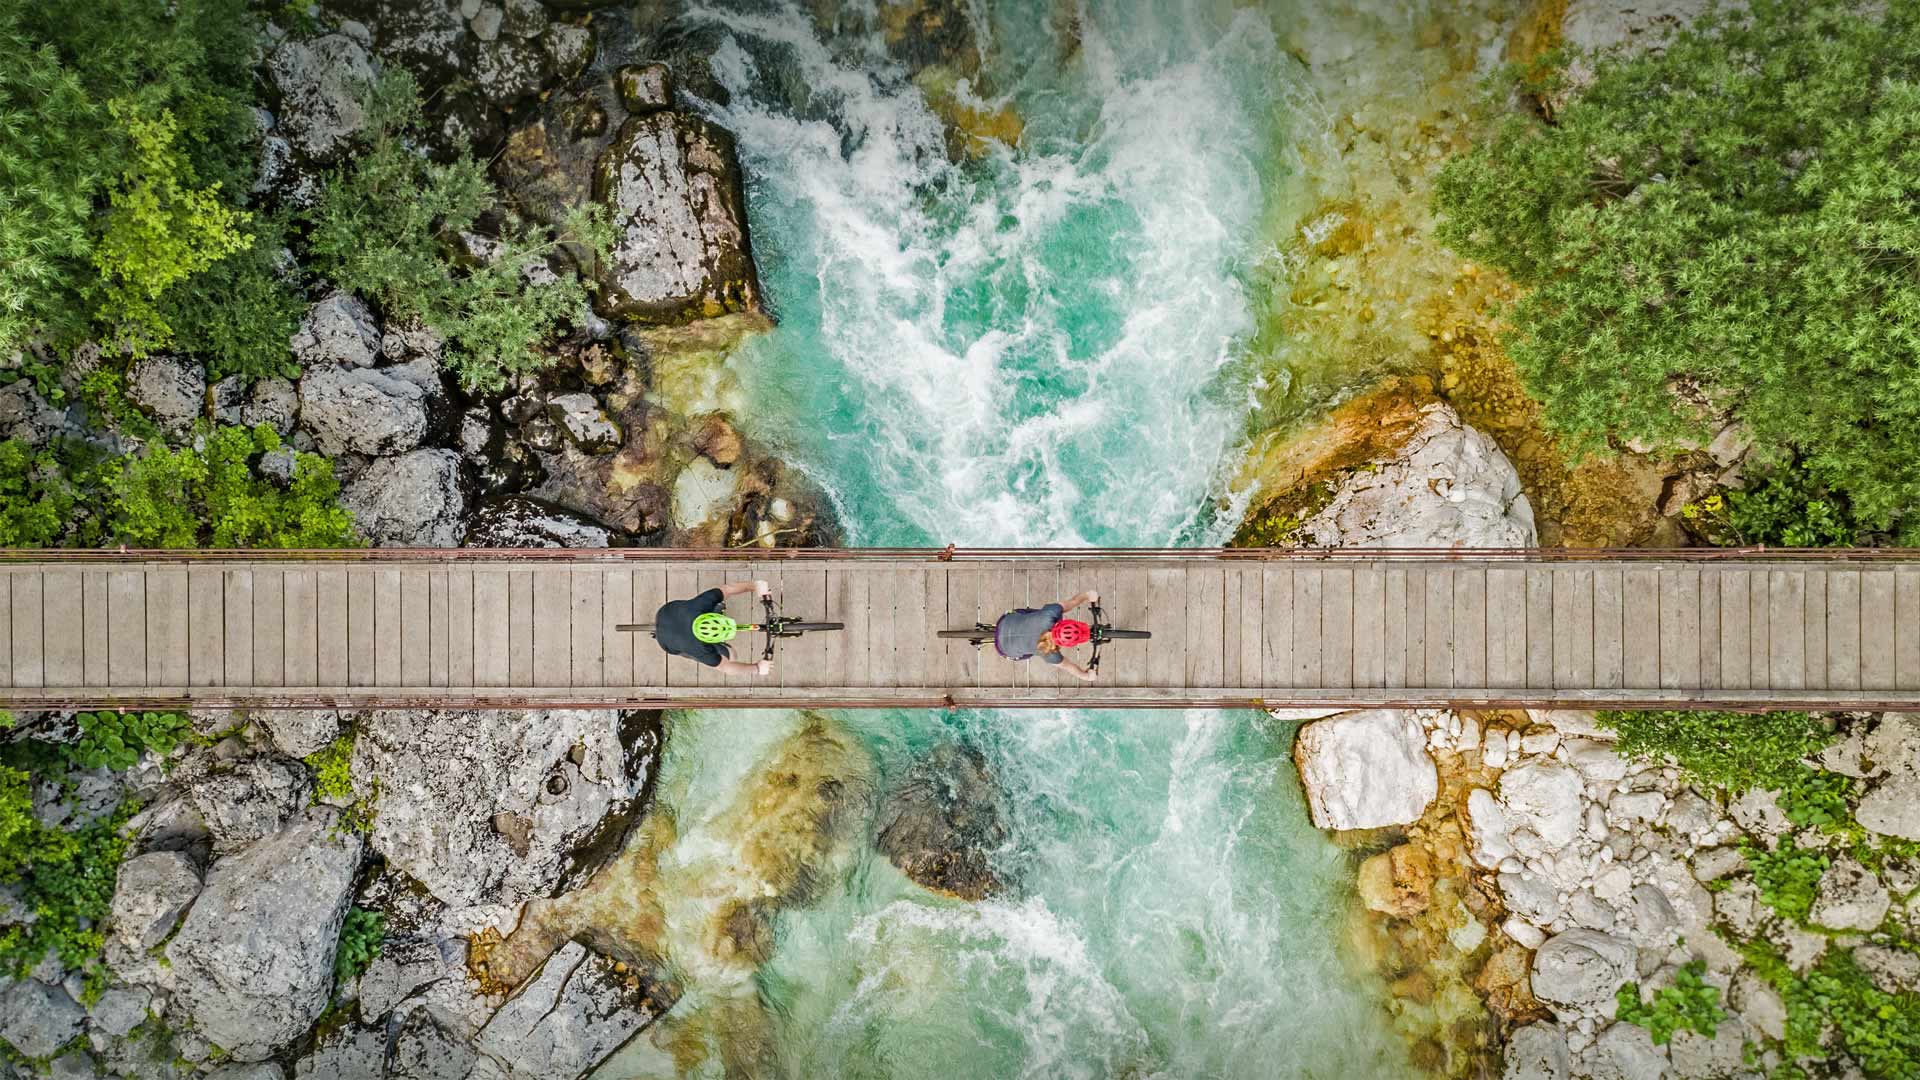 Cyclists on a wooden suspension bridge over the Soča River in Slovenia - Amazing Aerial Agency/Offset by Shutterstock)